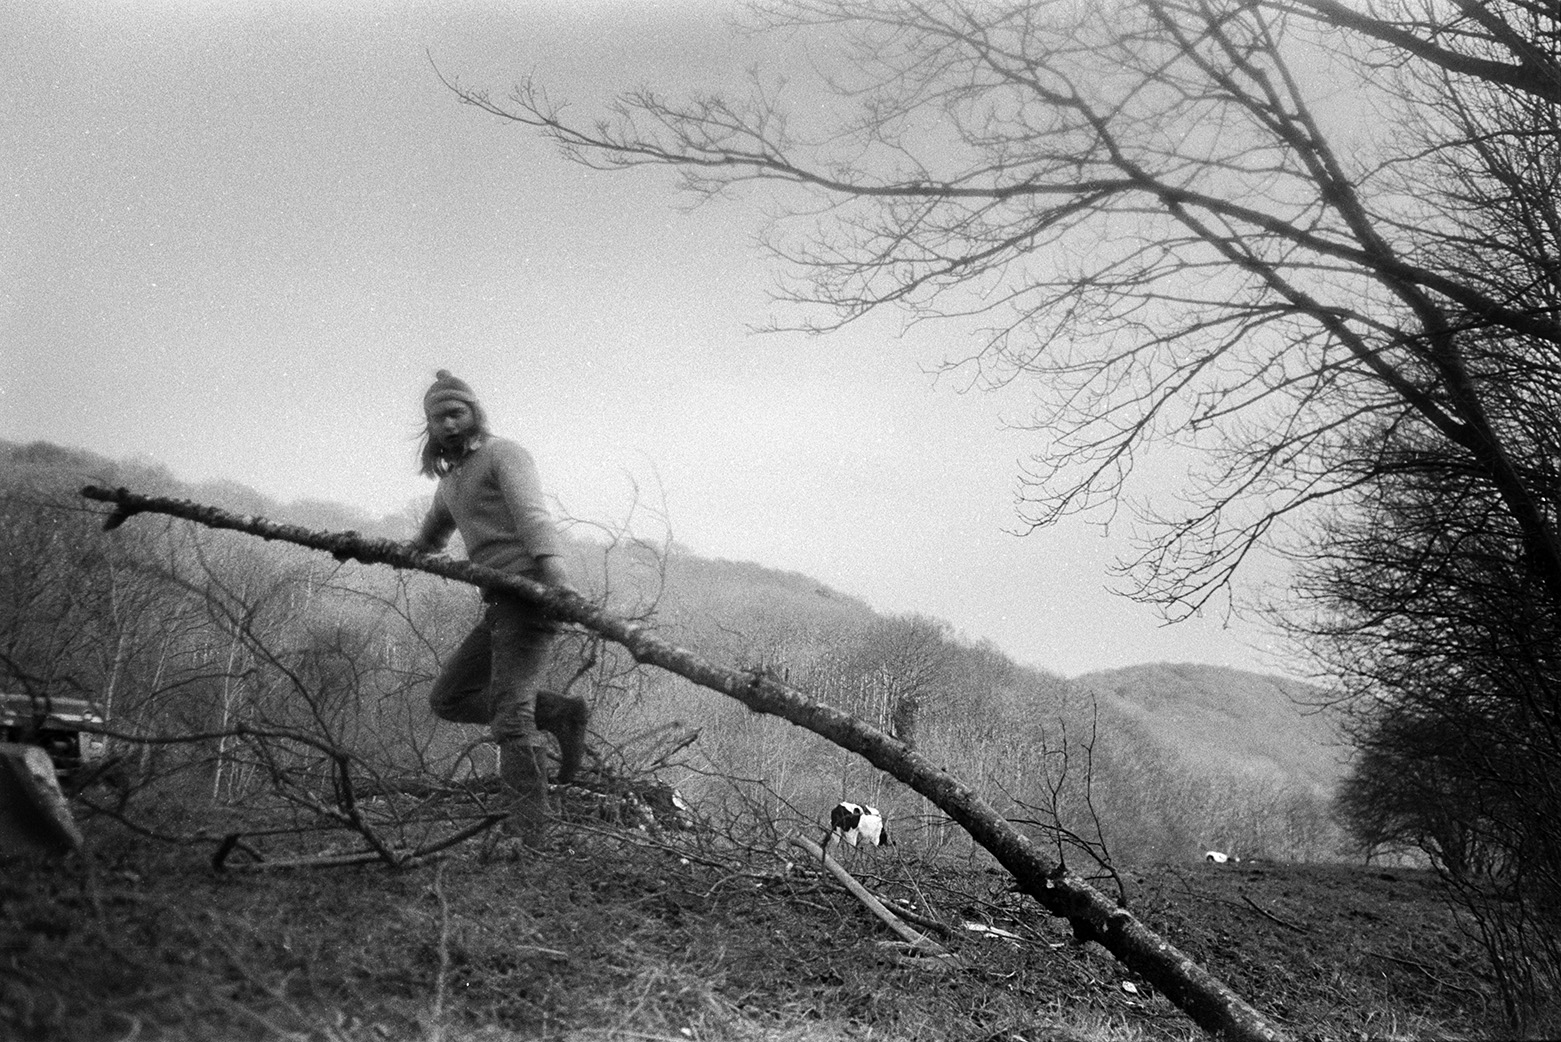 Derek Bright moving a large branch from a felled tree in a field near the banks of the flooded River Torridge at Mill Road Farm, Beaford. Woodland and cows can be seen in the background. The farm was also known as Jeffrys.